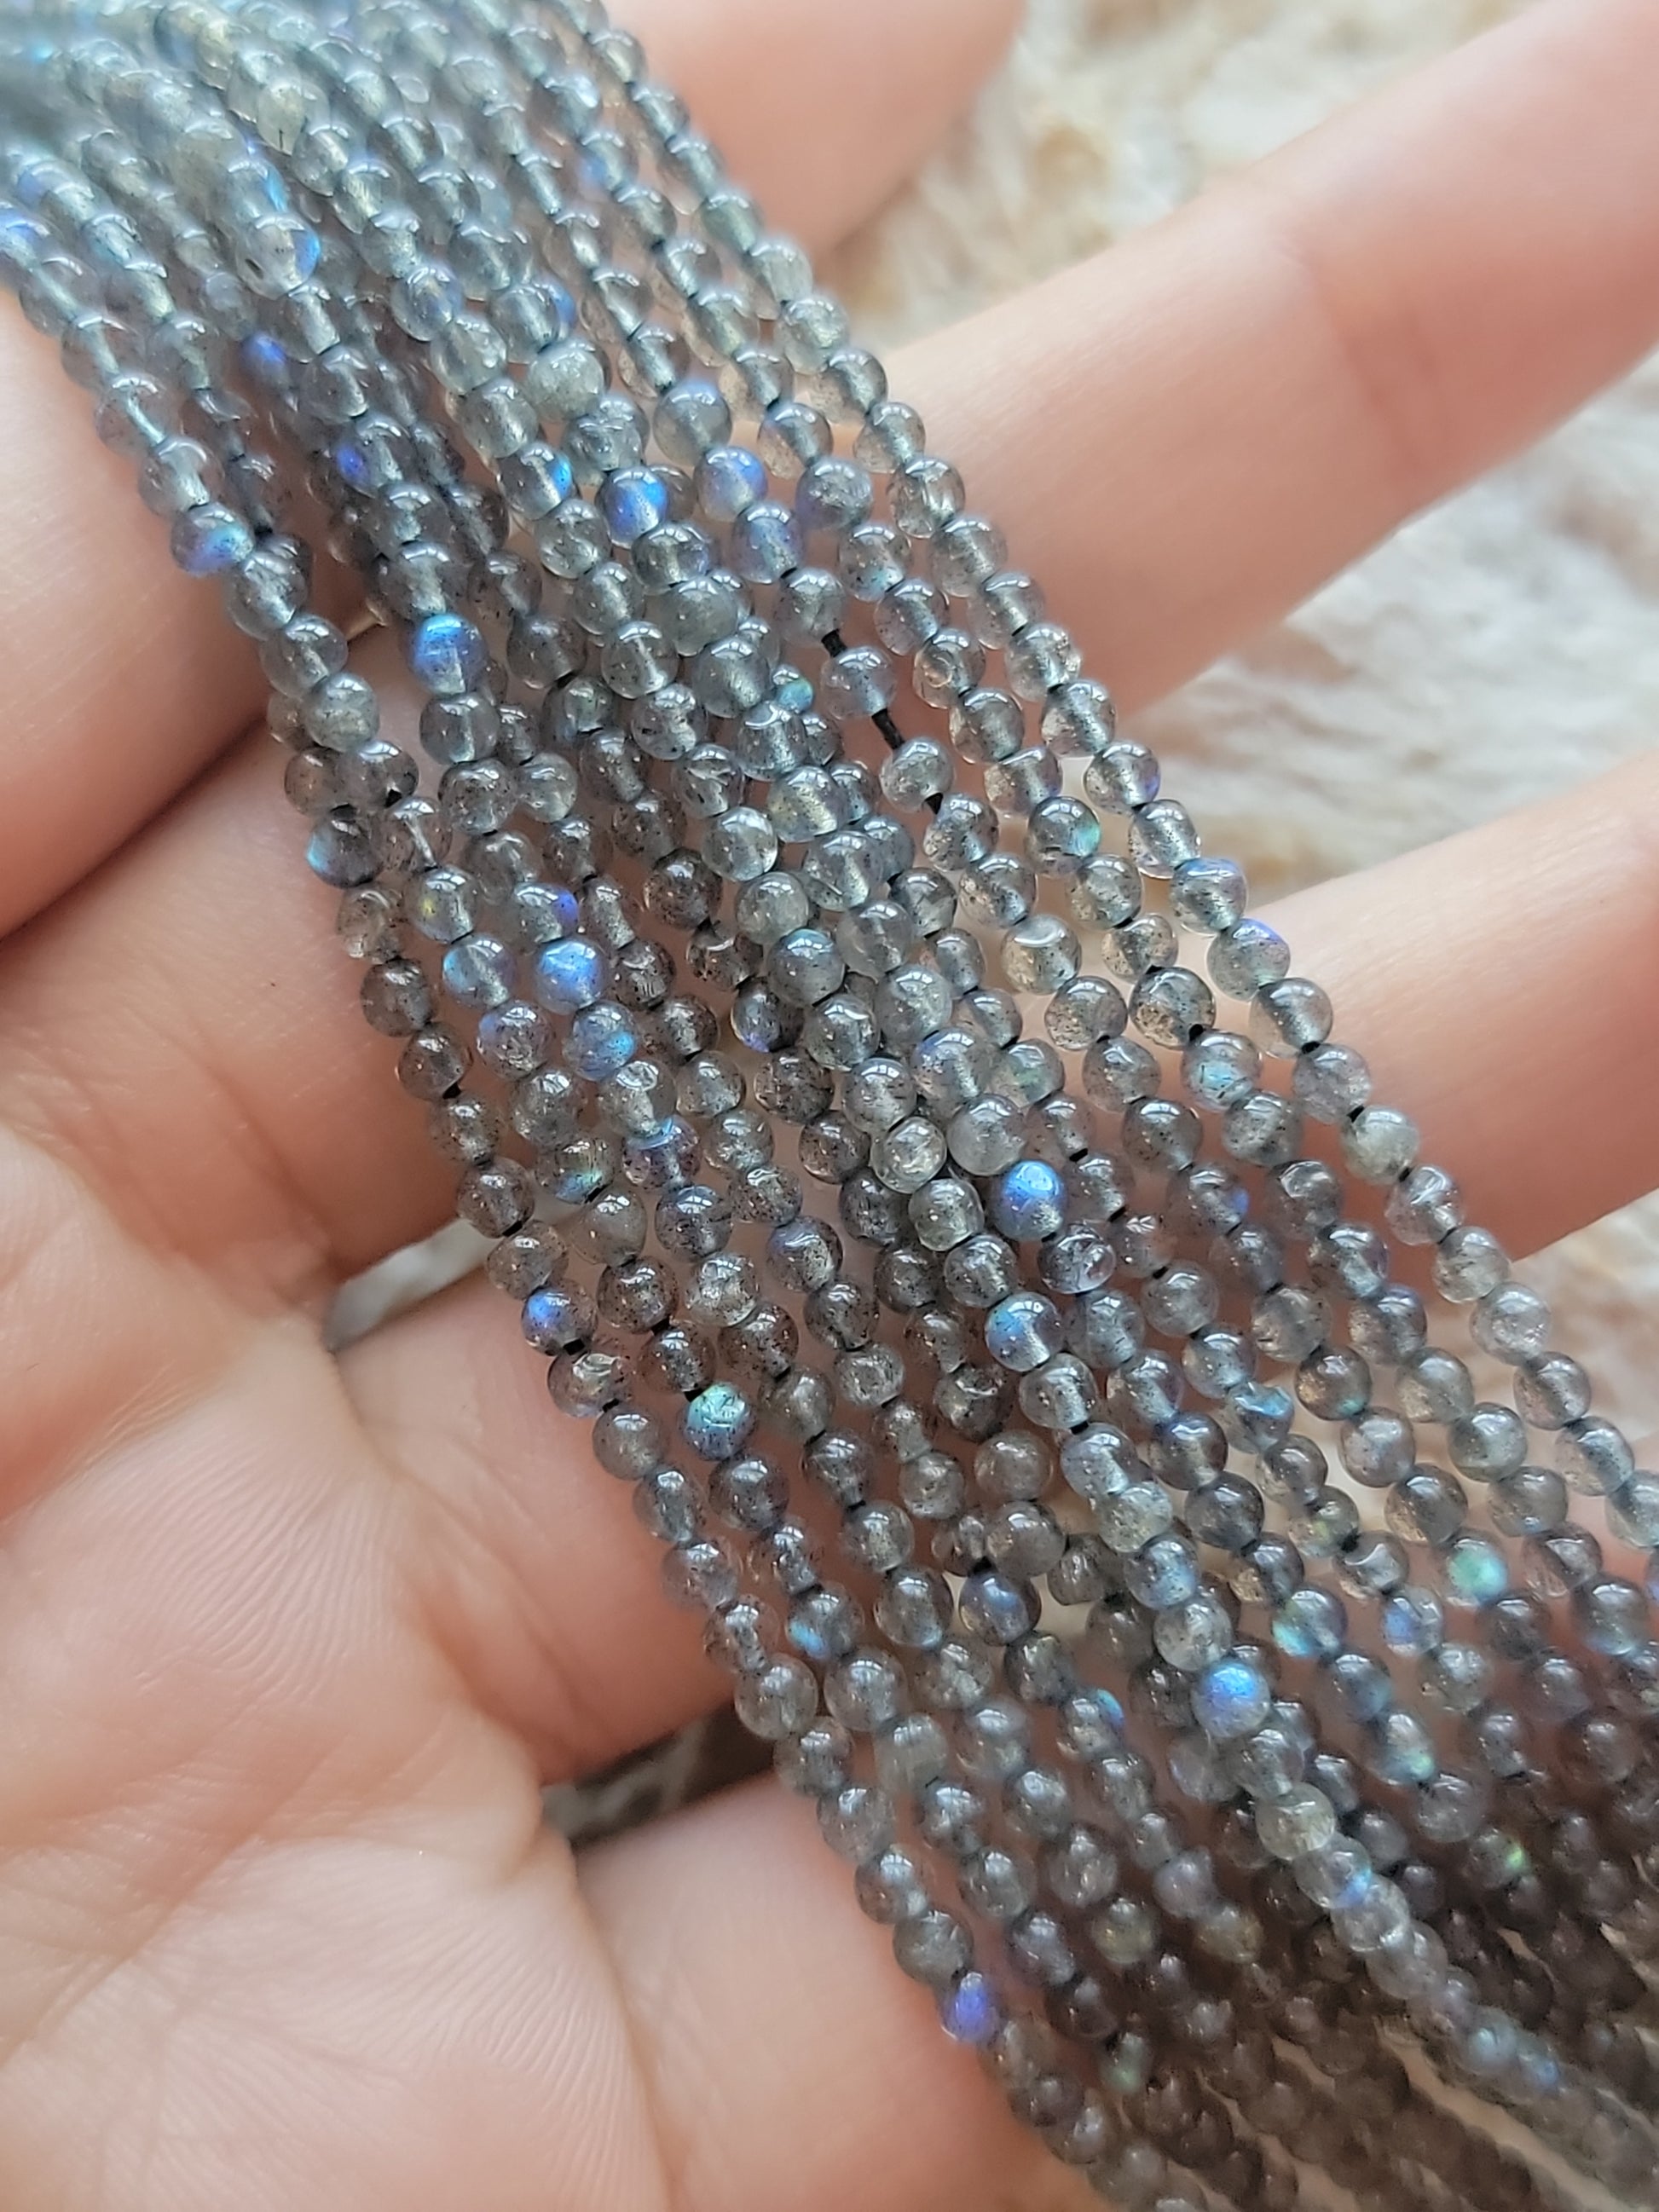 Crafting supplies such as labradorite seed beads available at wholesale and retail prices, only at our crystal shop in San Diego!